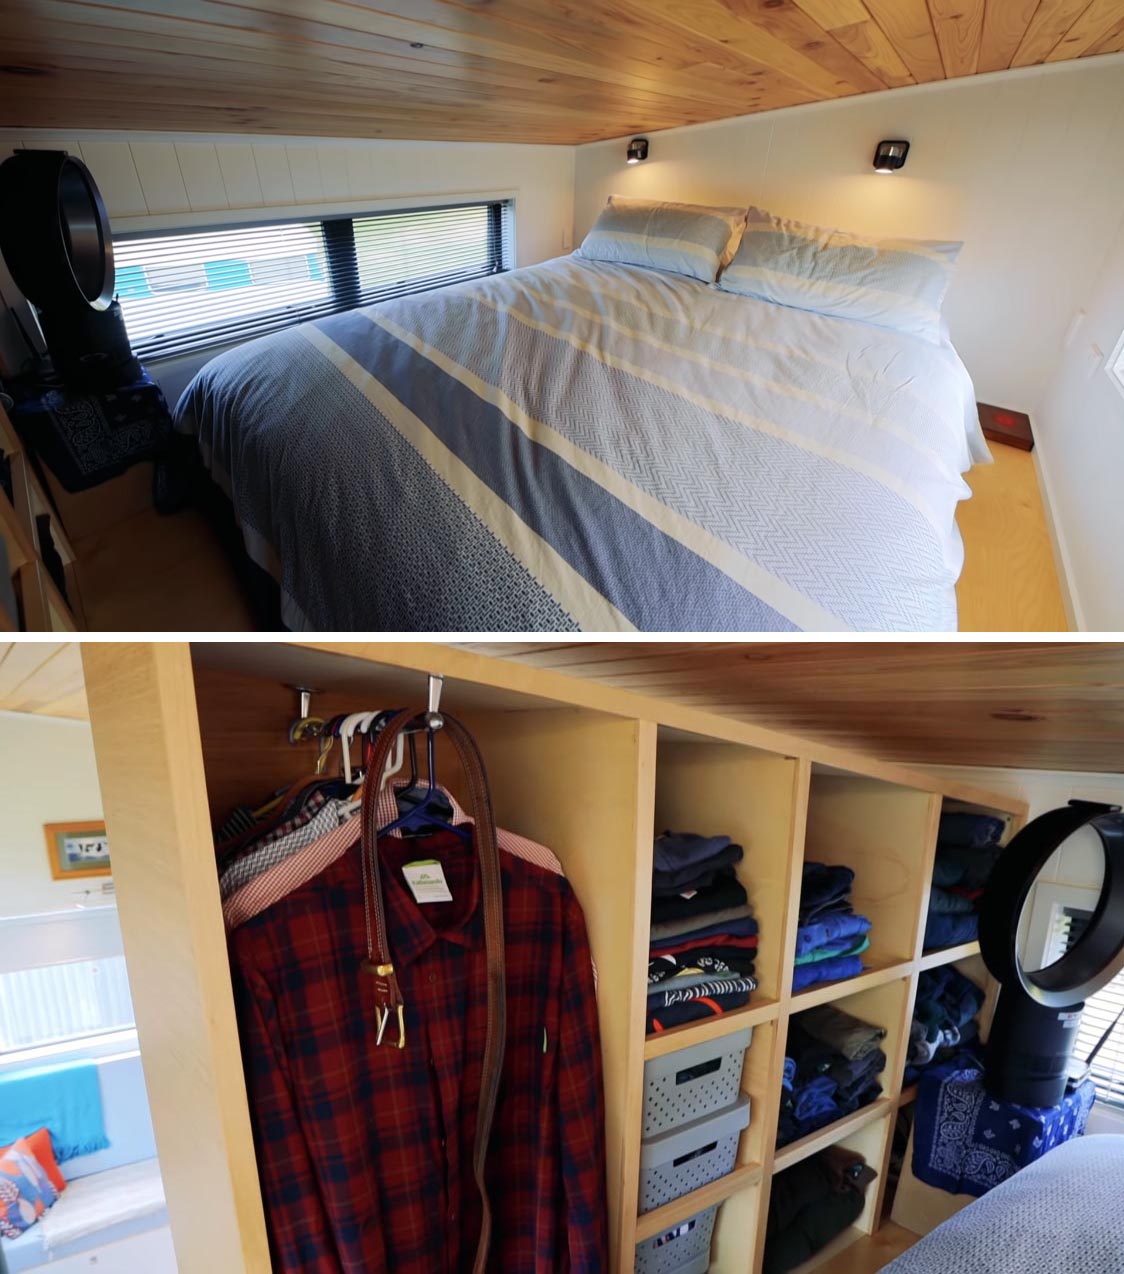 This modern tiny house loft bedroom includes white walls, windows on either side, and an open closet for clothes storage.